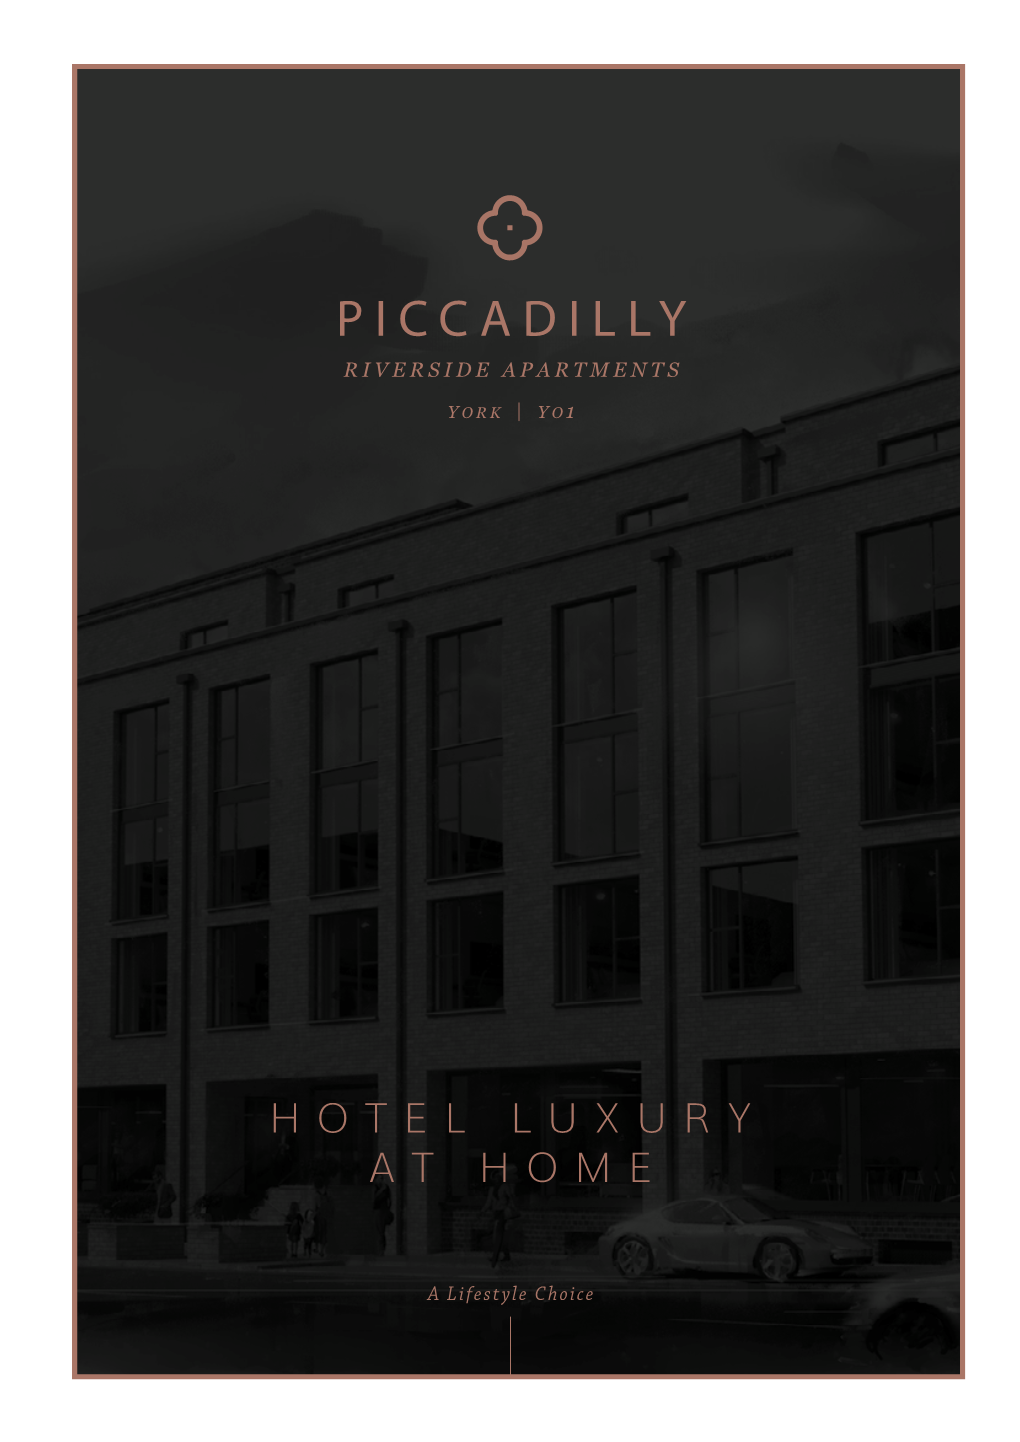 Piccadilly Riverside Apartments